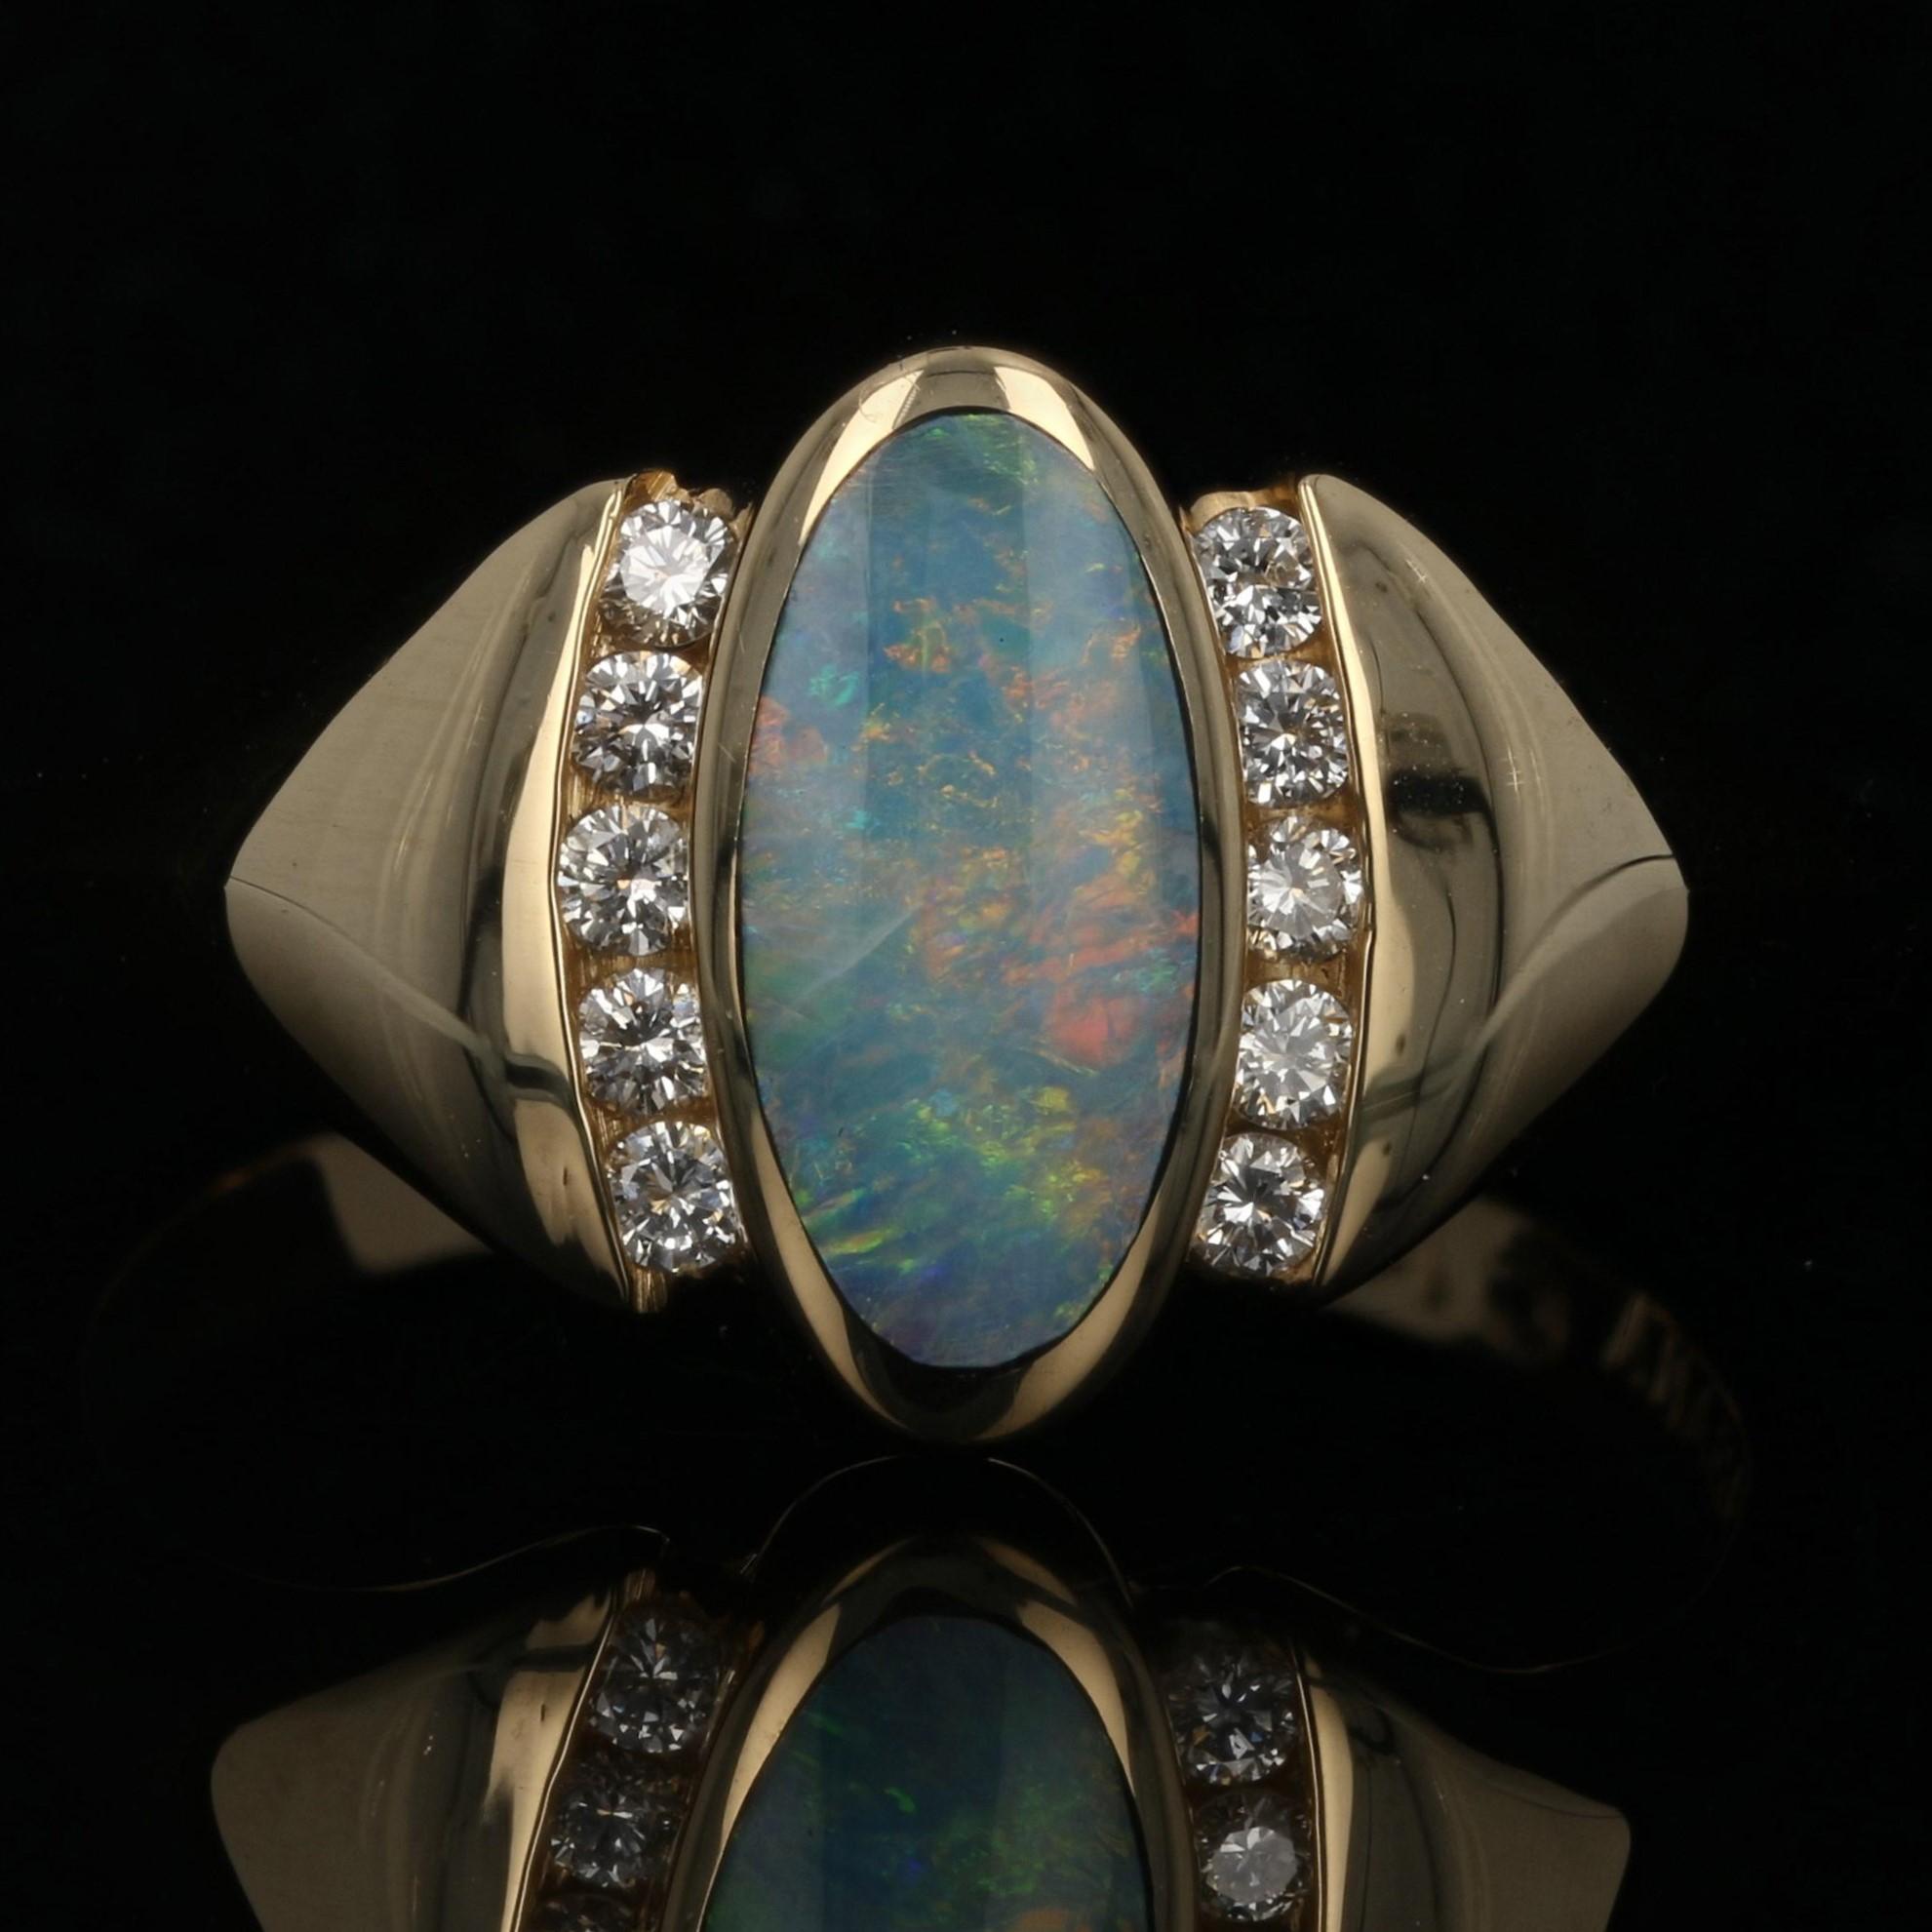 Elegance defined! Fashioned by Kabana in classic 14k yellow gold, this exquisite NEW ring features an inset opal cabochon framed on the sides with crescents of diamonds. Wide shoulders sweep back from the sides to merge into a smoothly polished